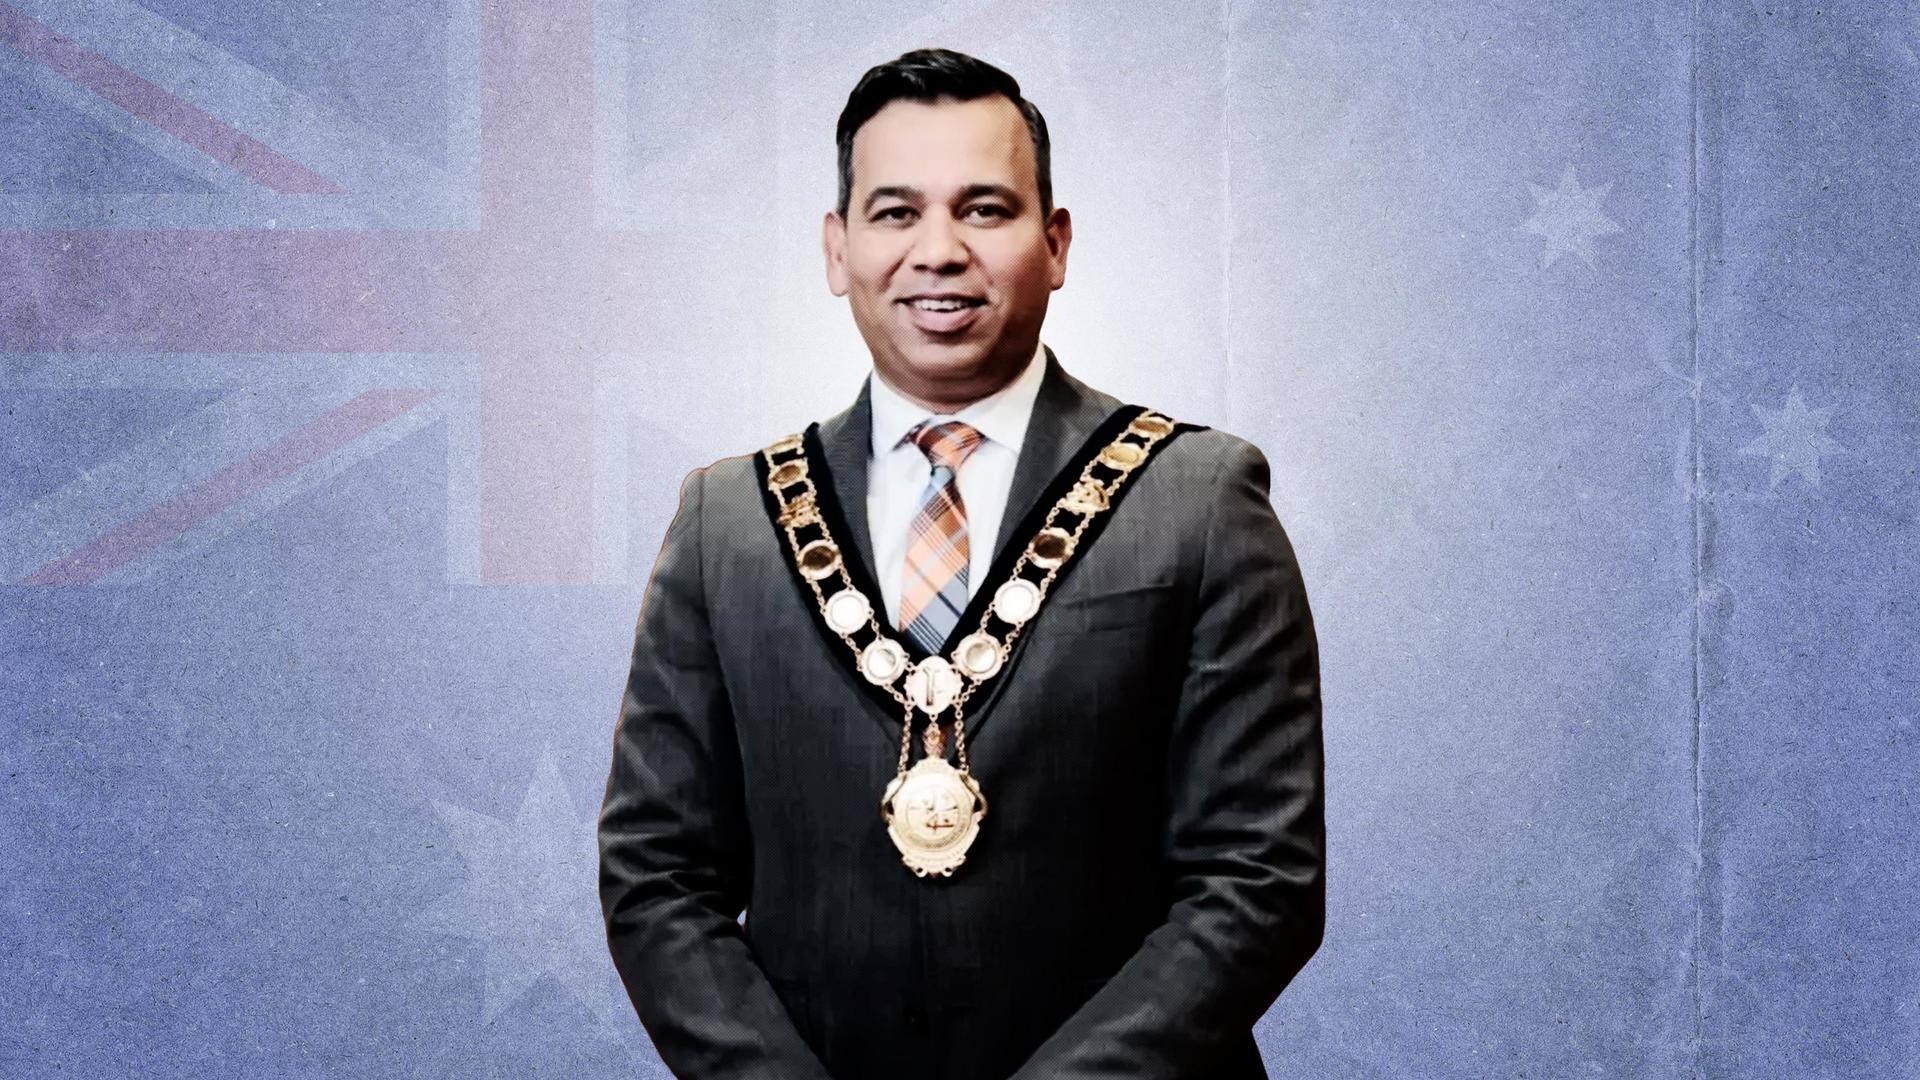 In a first, Indian-origin Sameer Pandey becomes Sydney's Lord Mayor